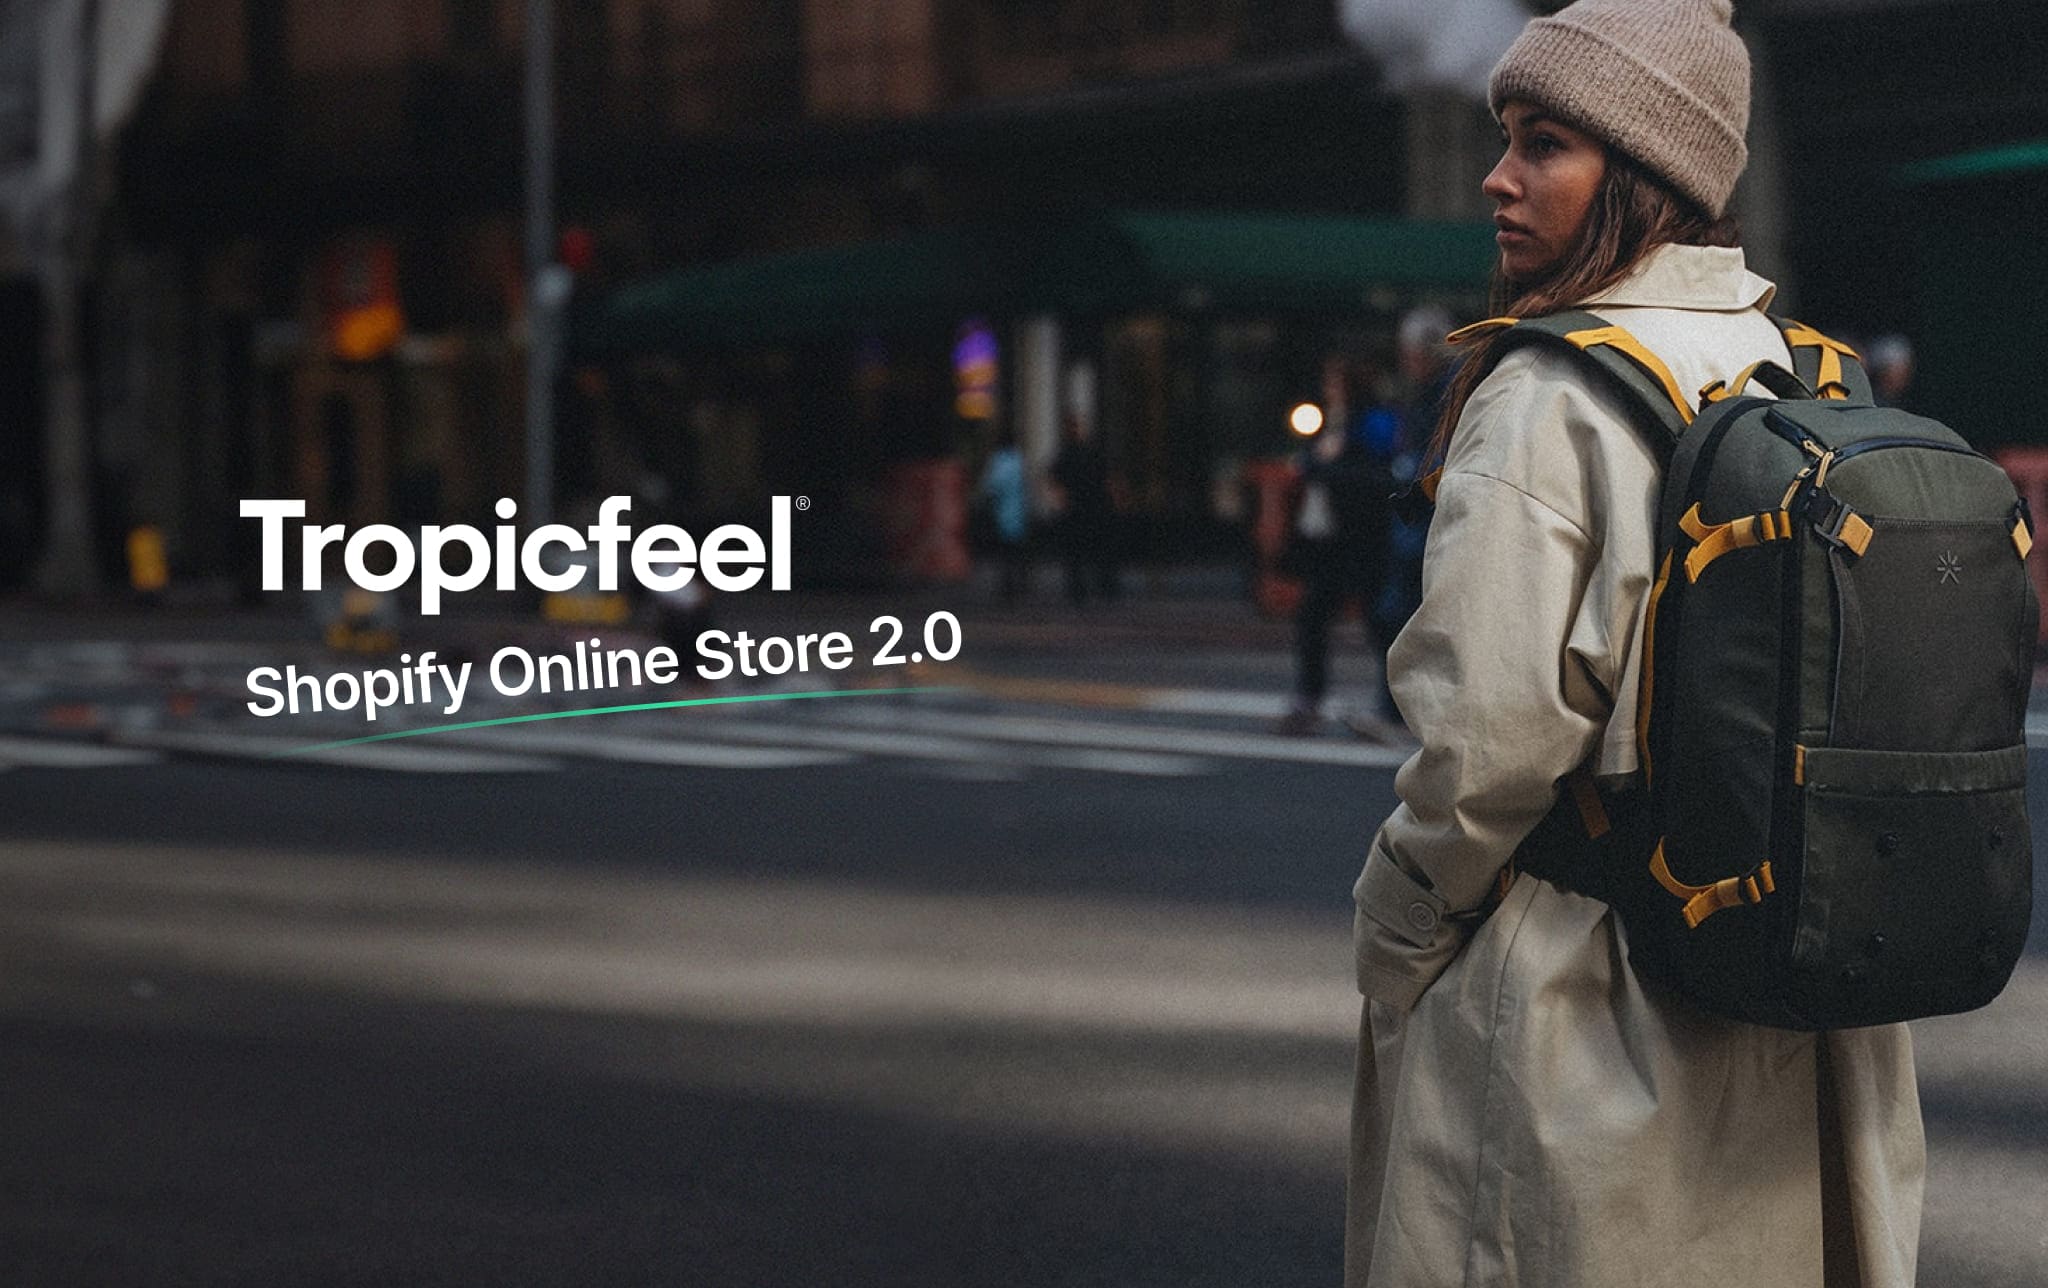 Putting client's needs first: Why we recommended Shopify Online Store 2.0 to Tropicfeel